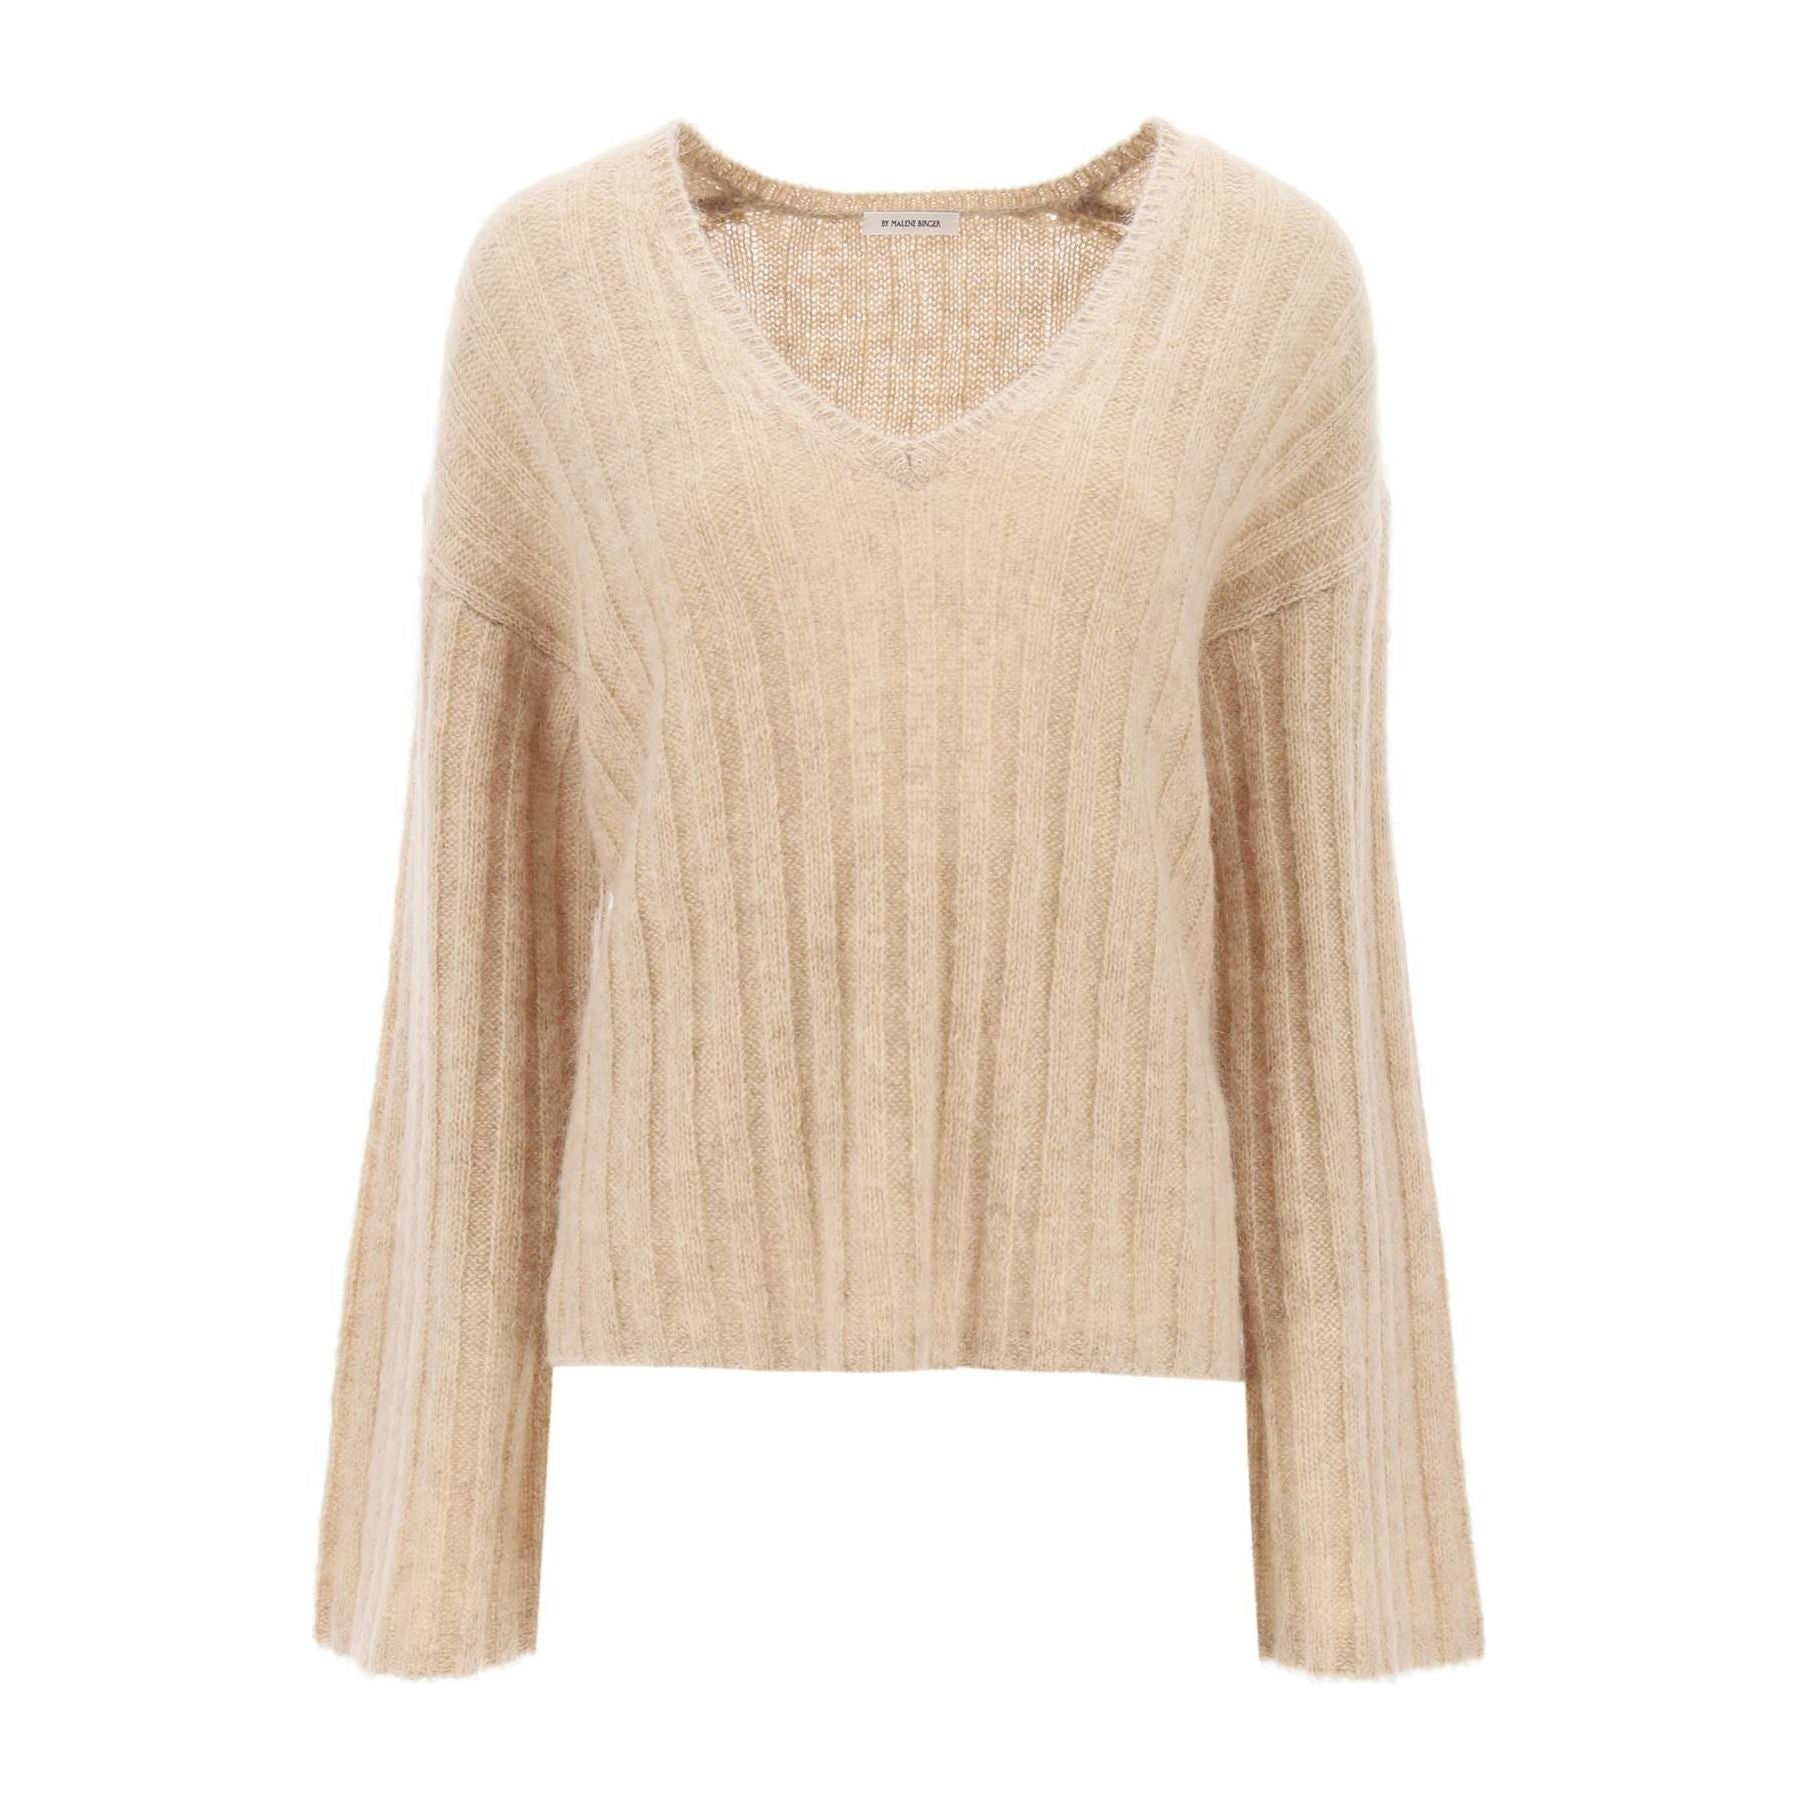 Cimone Sweater in Flat Ribbed Knit